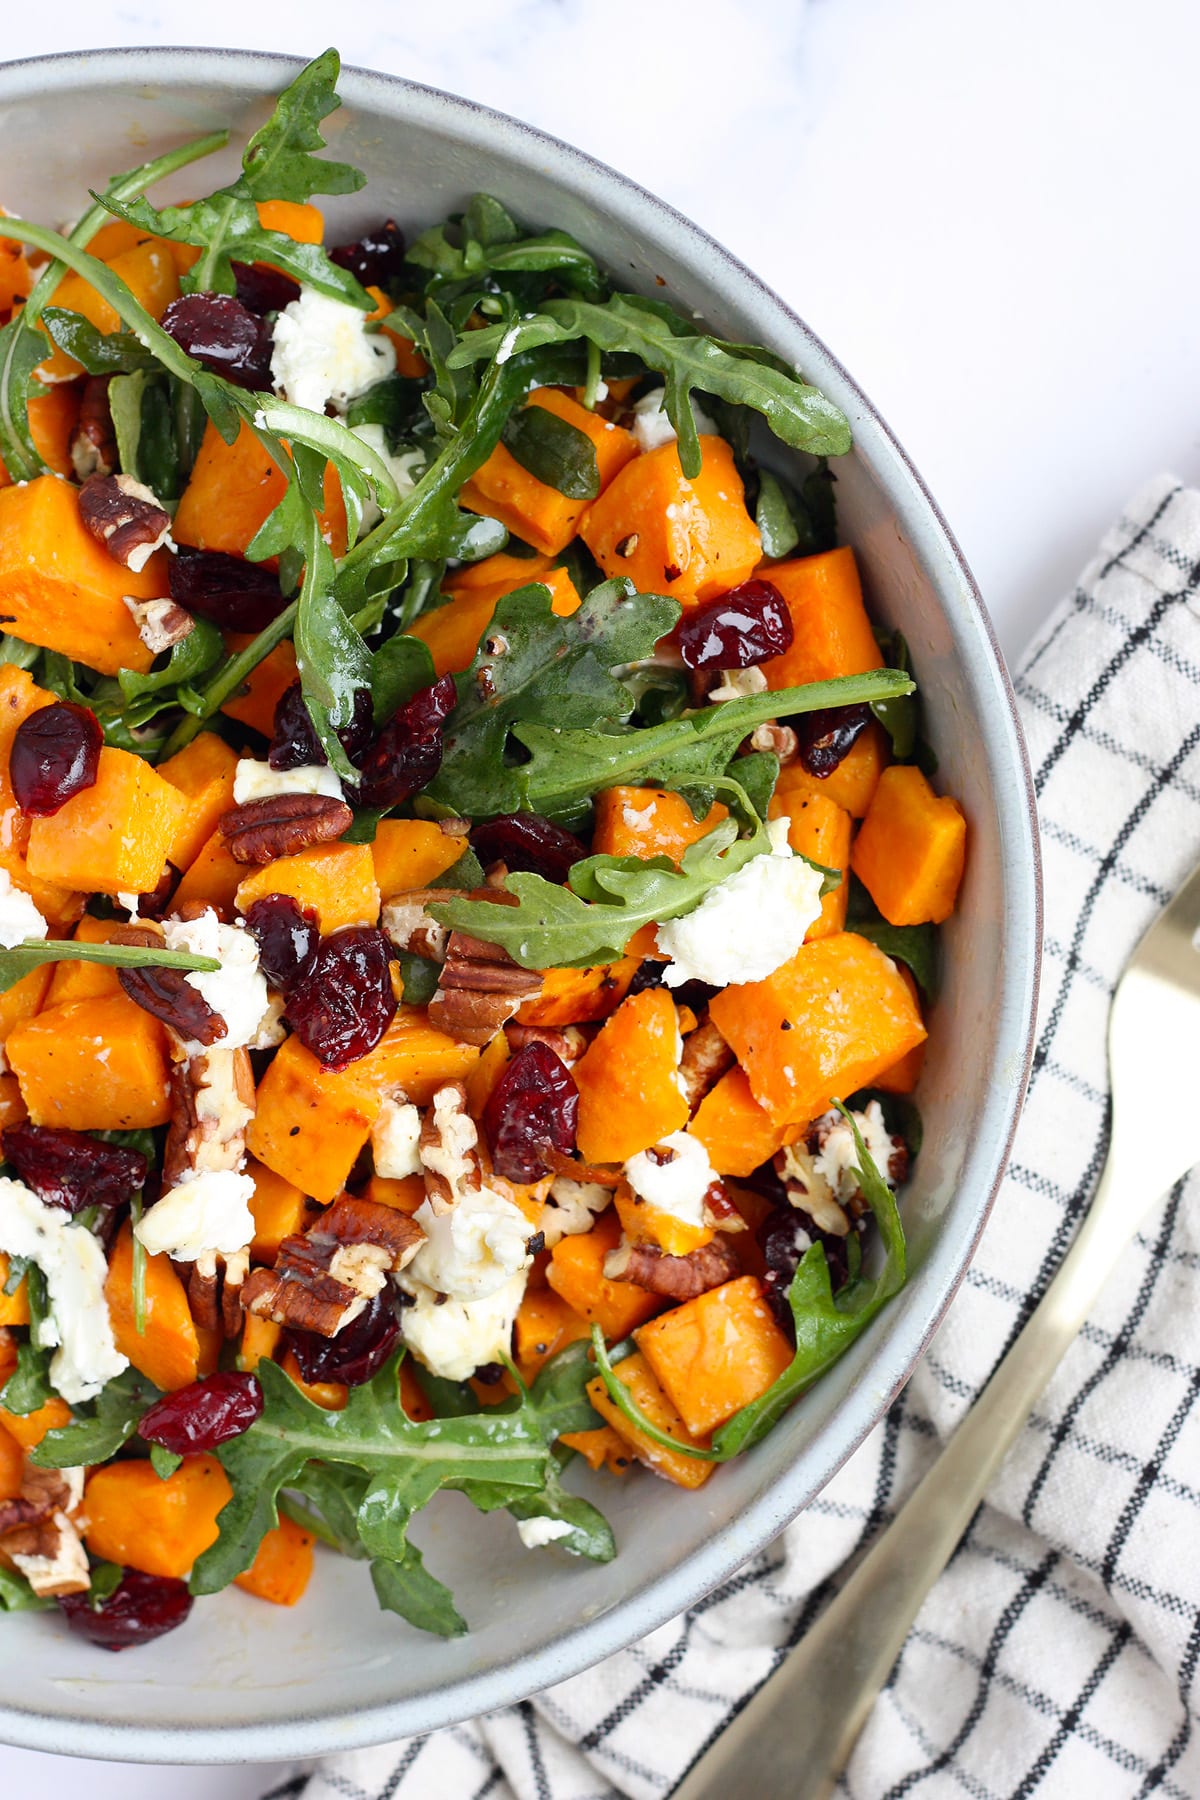 Roasted sweet potatoes, arugula, dried cranberries and goat cheese in a ceramic serving bowl.